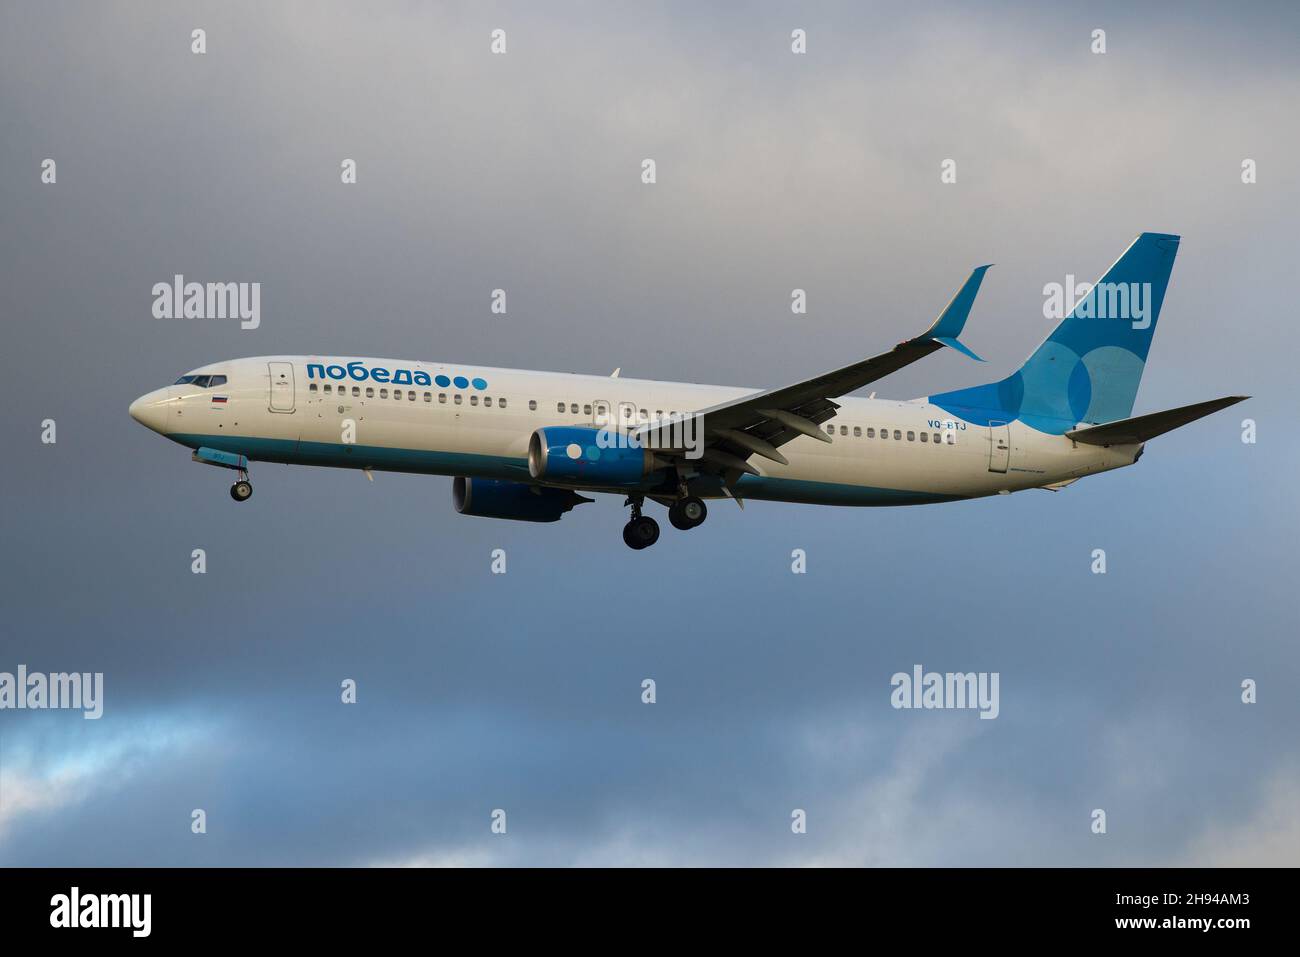 SAINT PETERSBURG, RUSSIA - OCTOBER 28, 2020: Flying Boeing 737-800 (VQ-BTJ) aircraft of Pobeda Airlines against the background of the cloudy sky Stock Photo